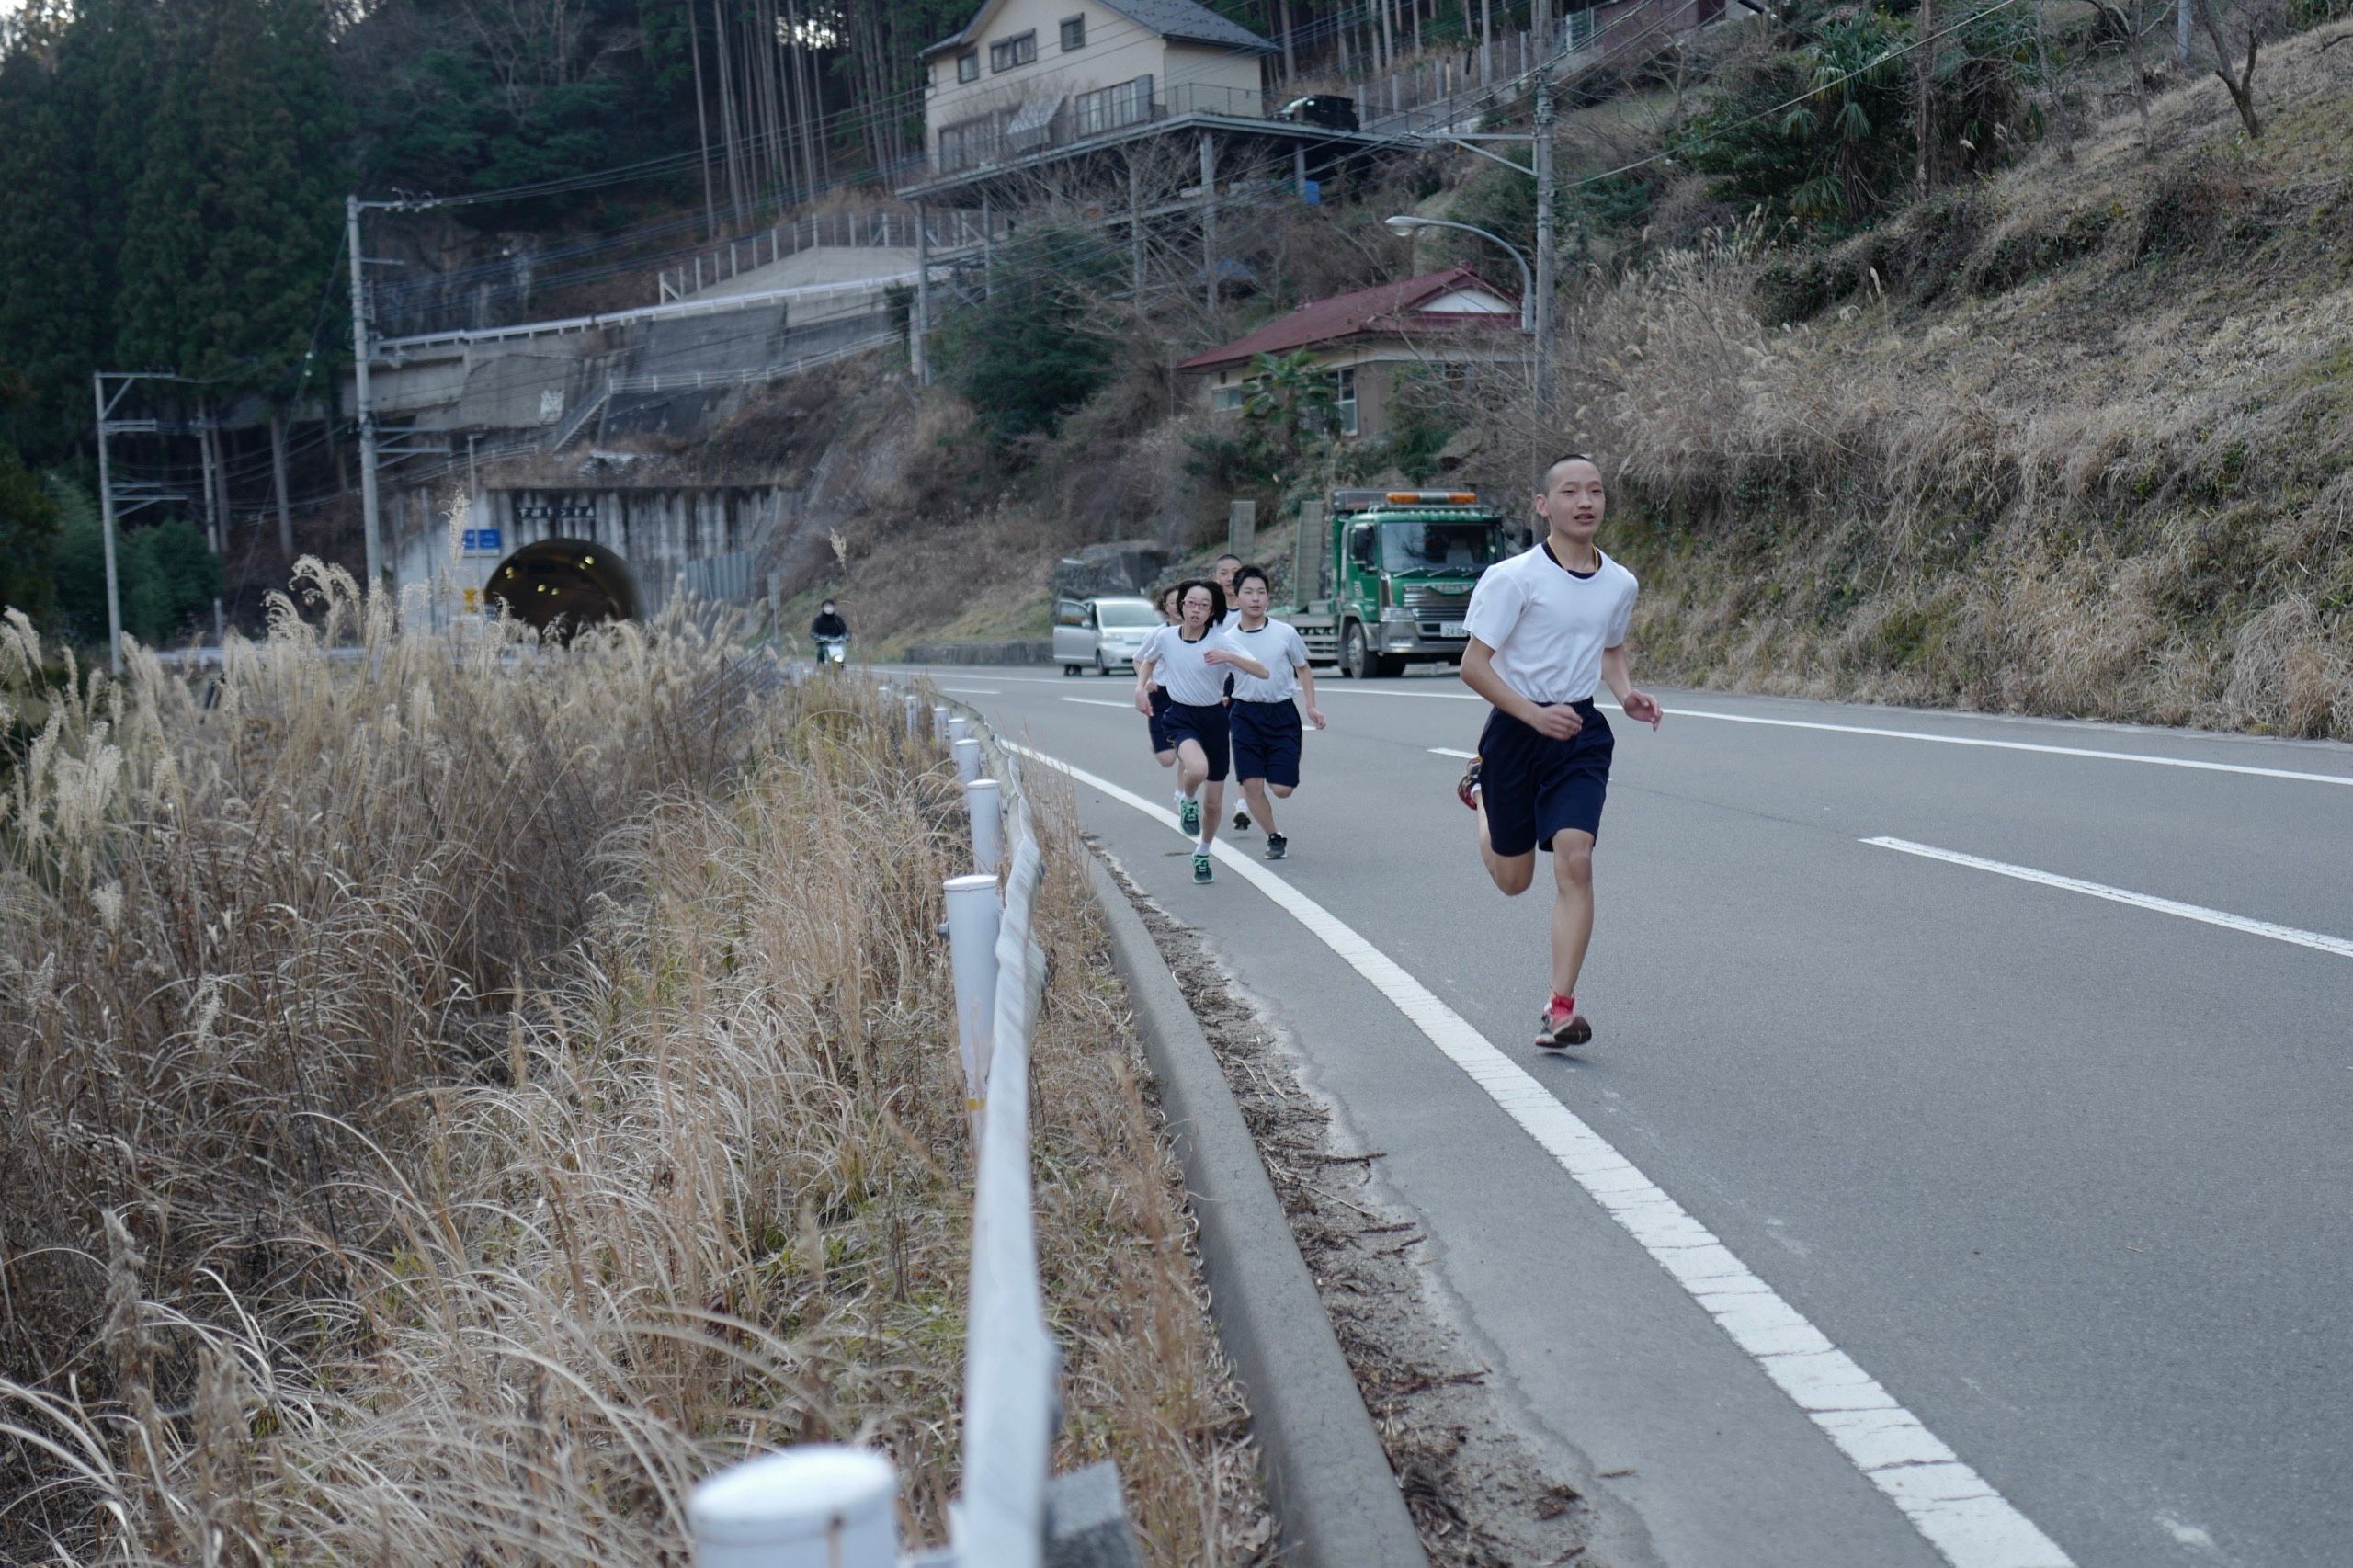 Schoolchildren in exercise clothes run along the side of a country road, with the entrance of a tunnel in the background.